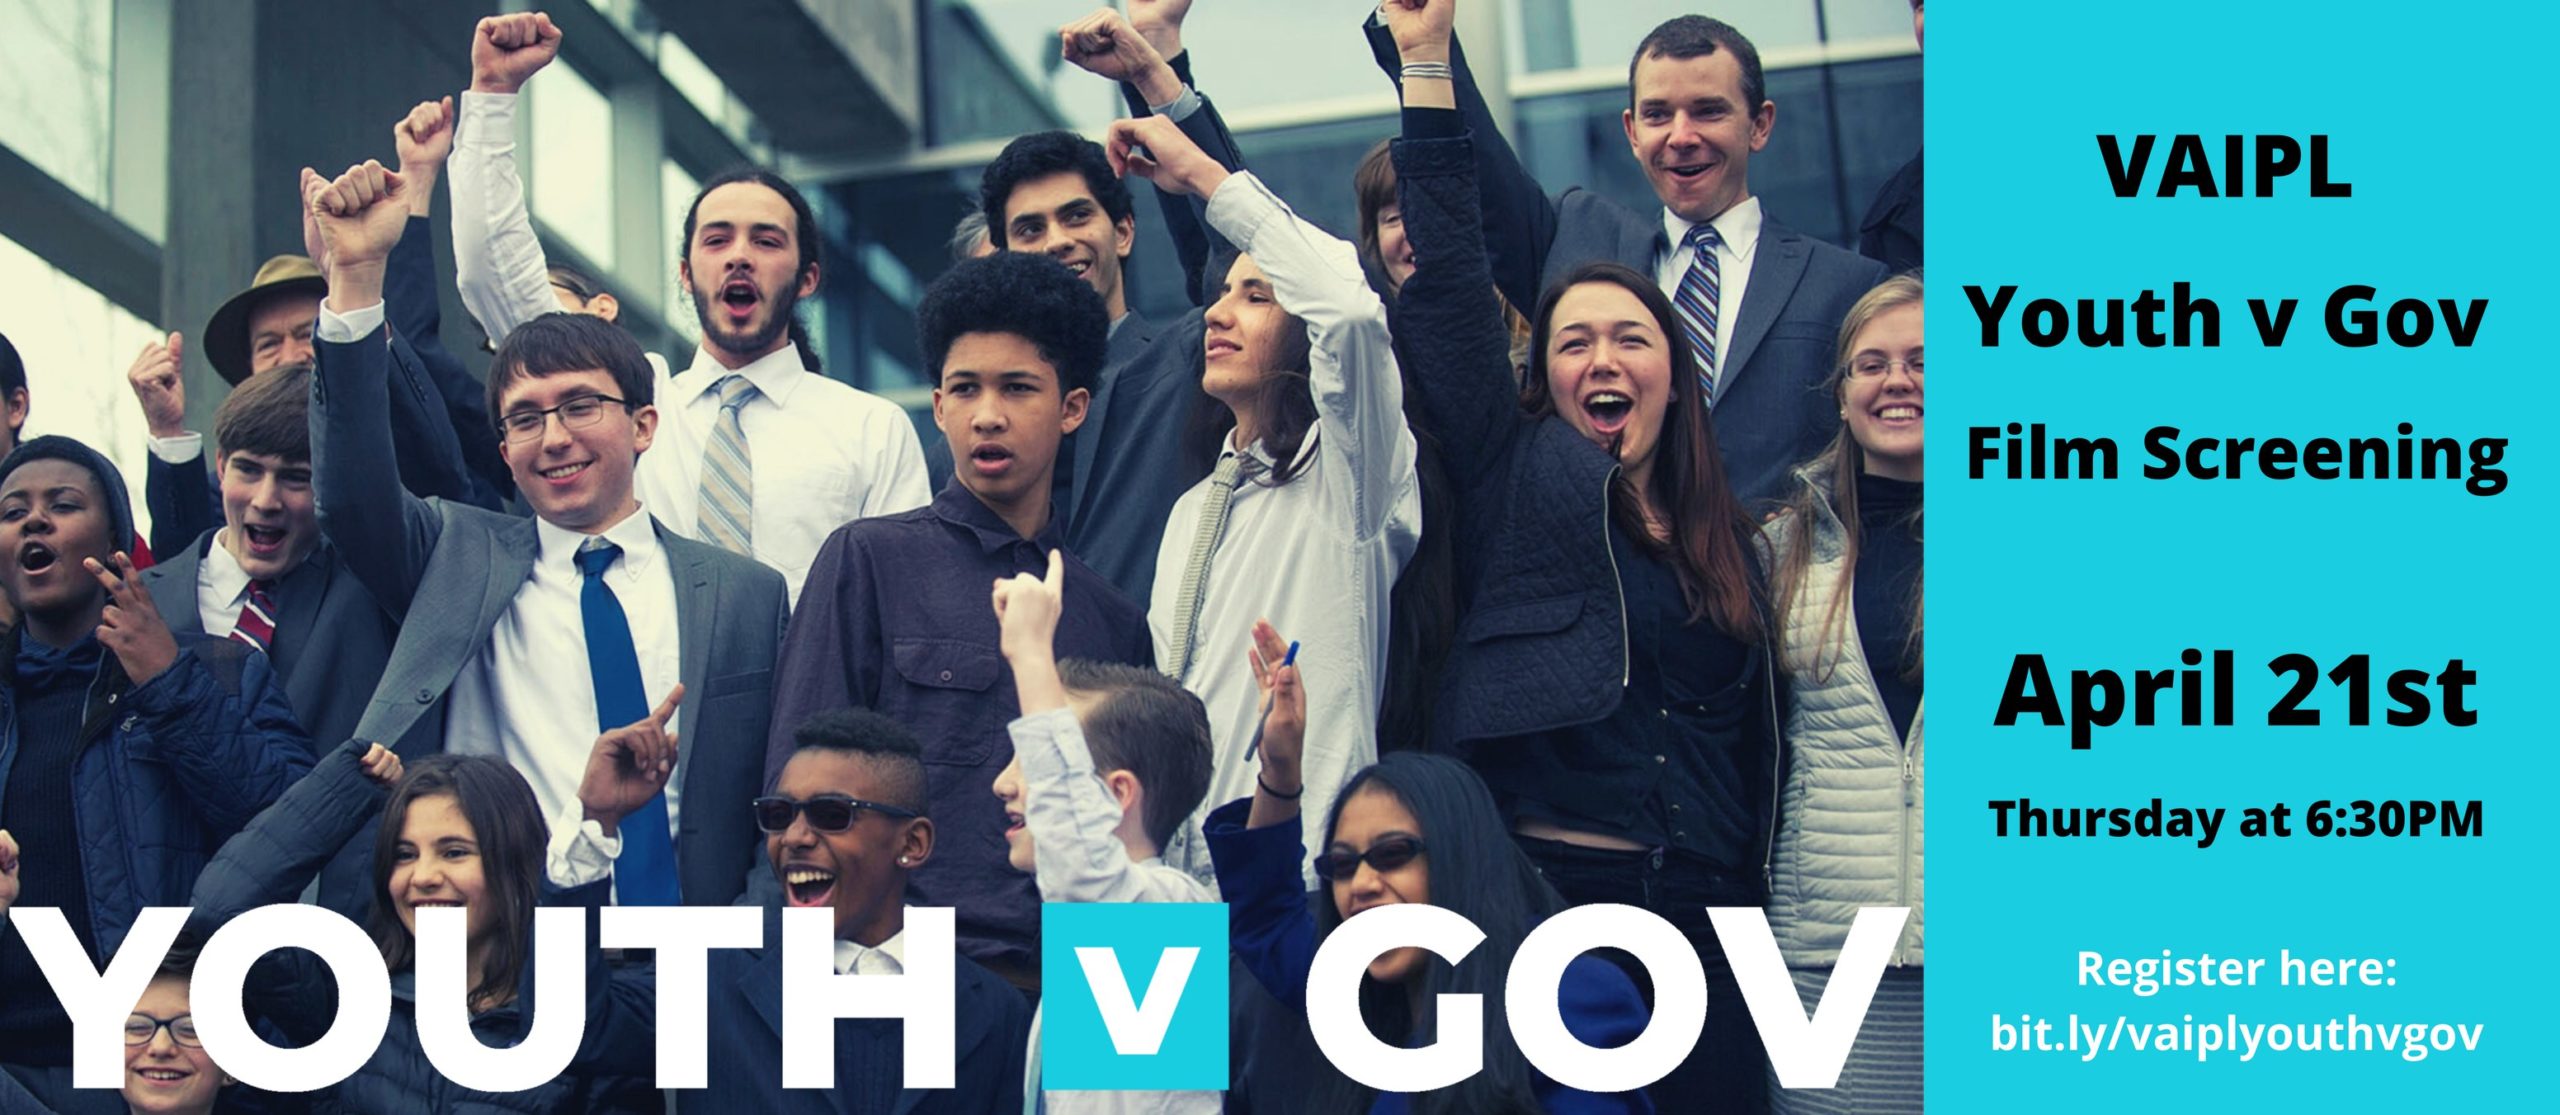 image of young people dressed business casual with text overlayed "Youth v. Gov"